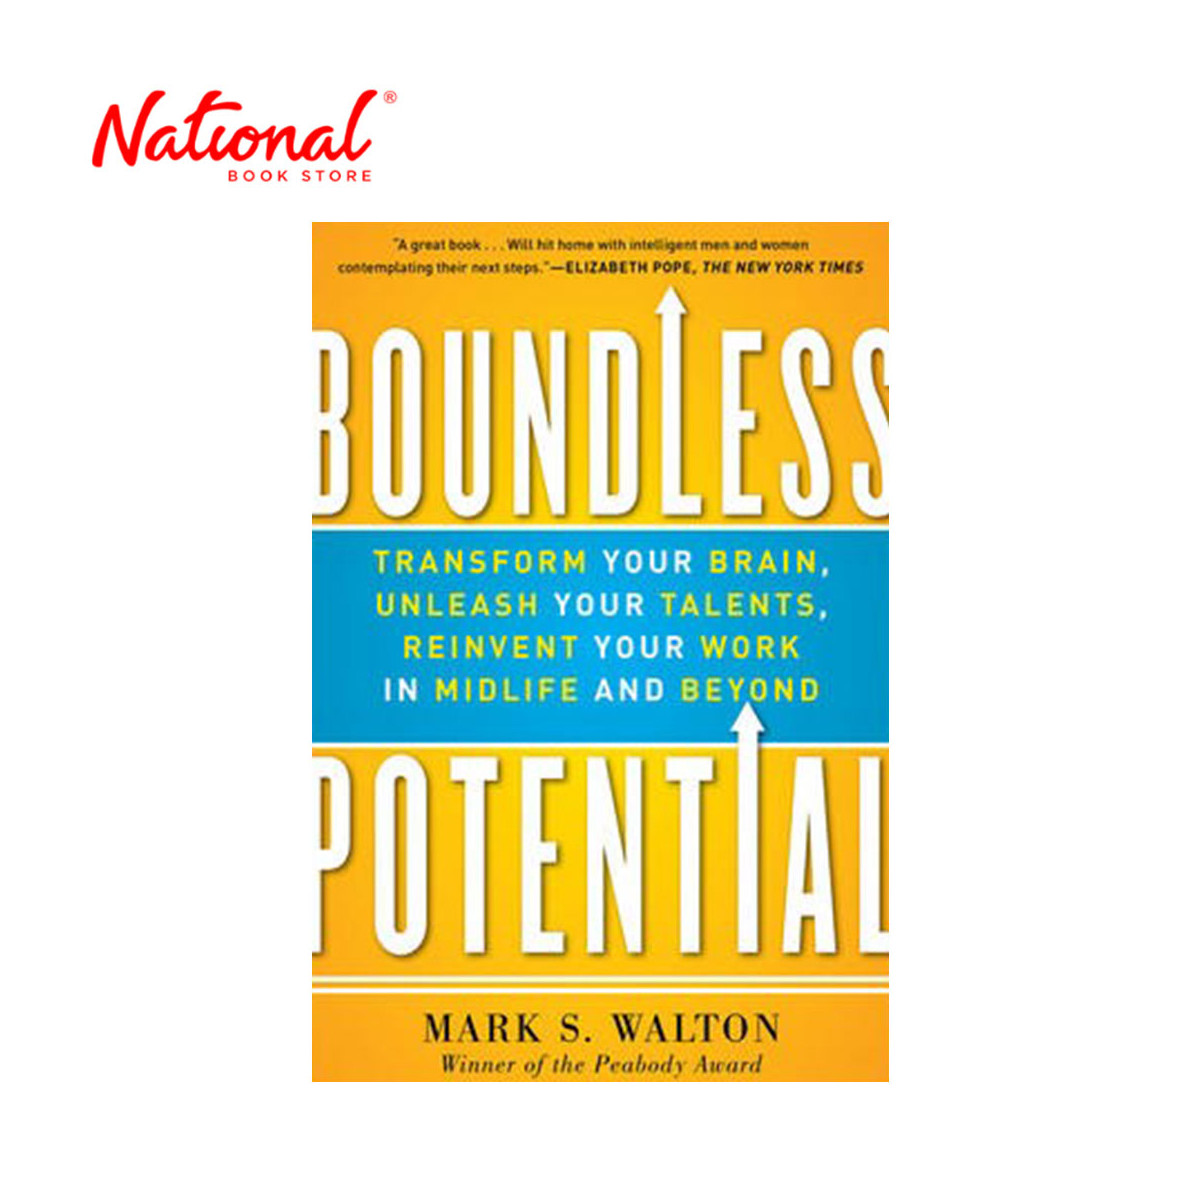 Boundless Potential by Mark Walton - Hardcover - Non-Fiction - Business & Investing